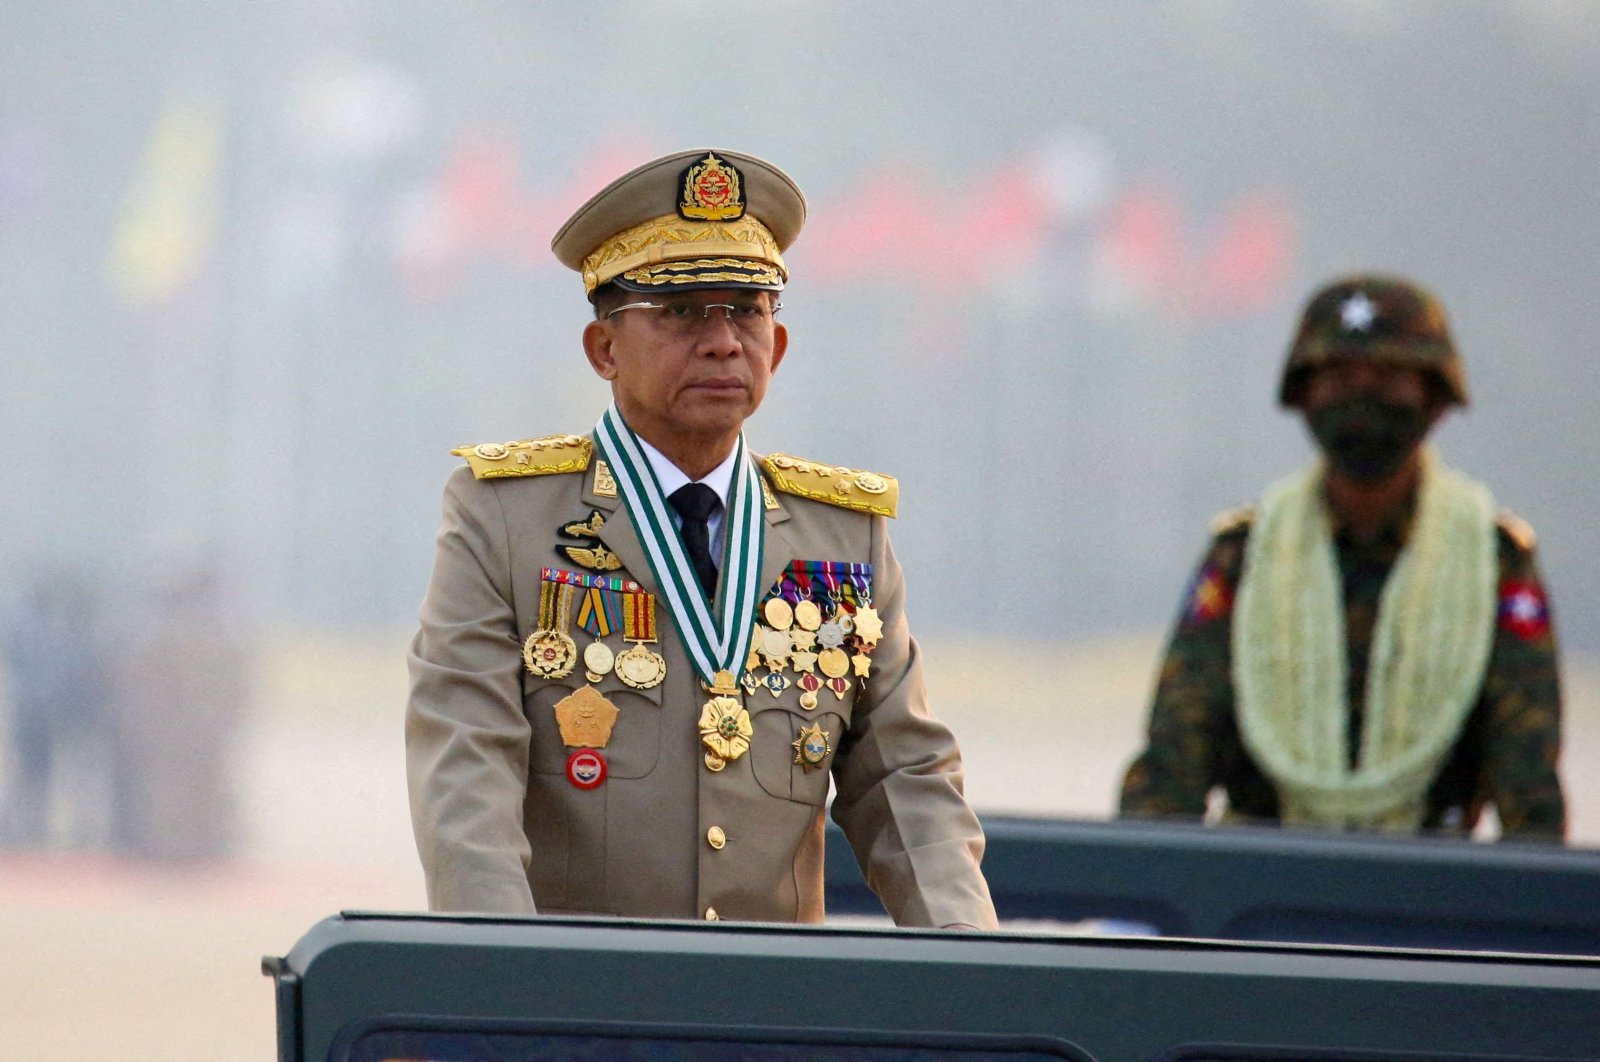 Myanmar&#039;s junta chief Senior General Min Aung Hlaing, who ousted the elected government in a coup on Feb. 1, 2021, presides over an army parade on Armed Forces Day, Naypyitaw, Myanmar, March 27, 2021. (Reuters Photo)